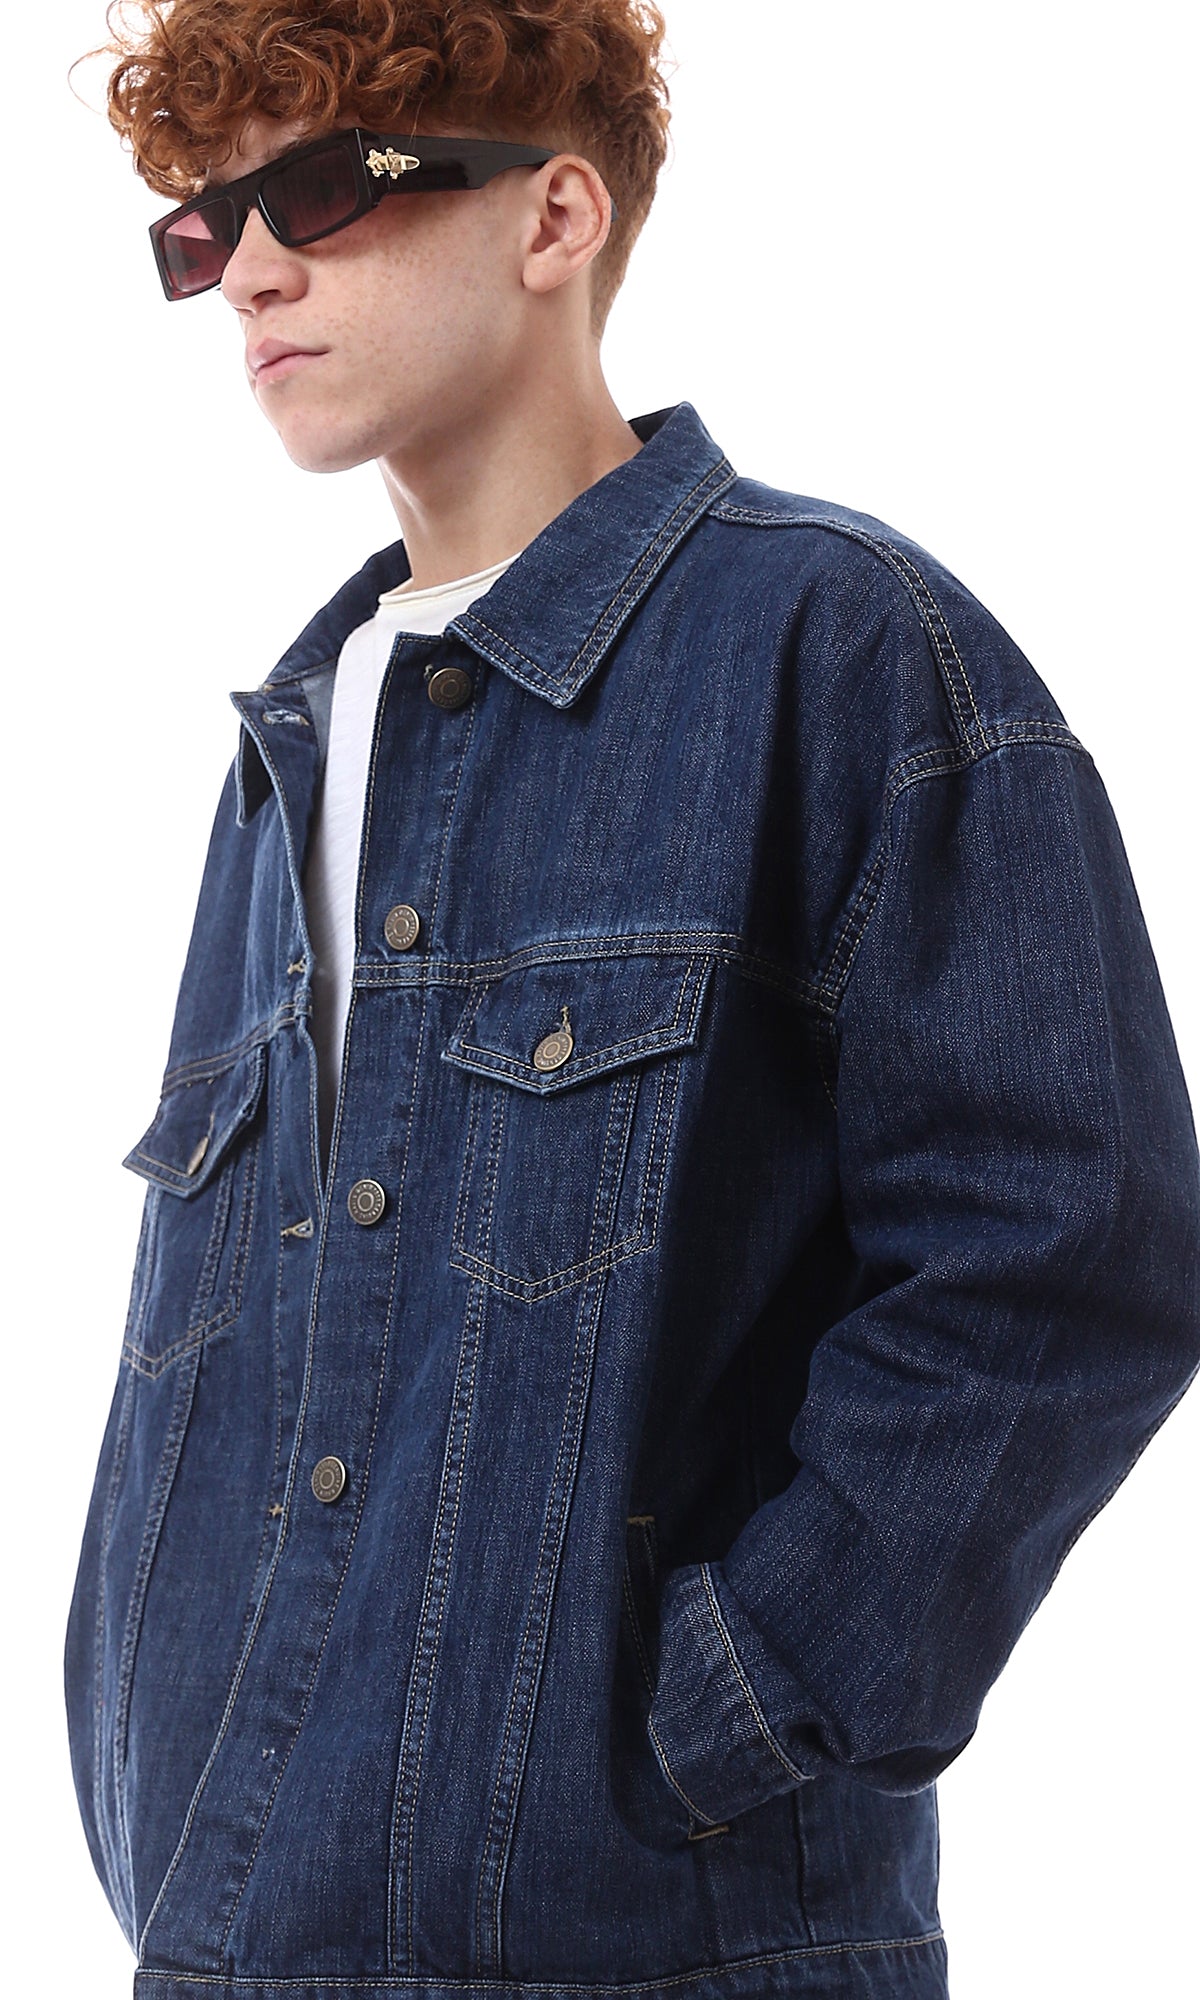 O174496 Buttoned Casual Navy Blue Denim Jacket